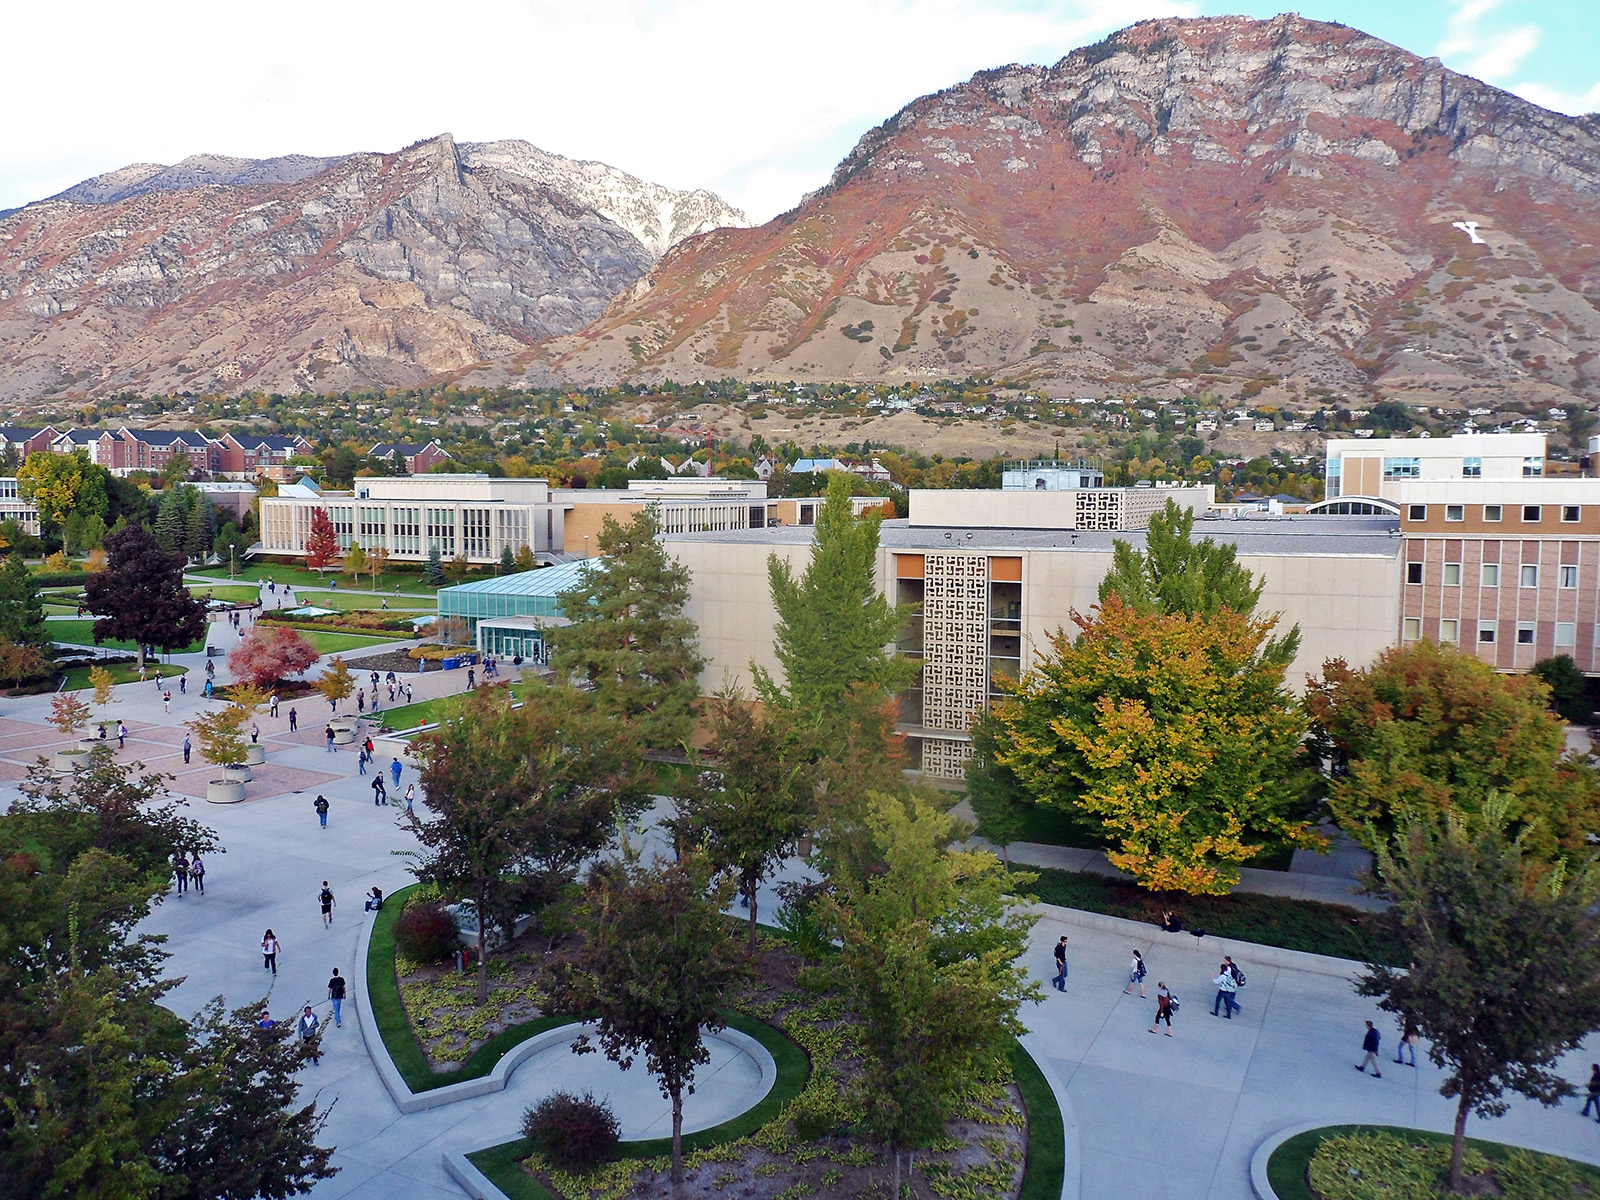 The Brigham Young University campus in Provo, Utah. Photo by Pastelitodepapa/Wikipedia/Creative Commons